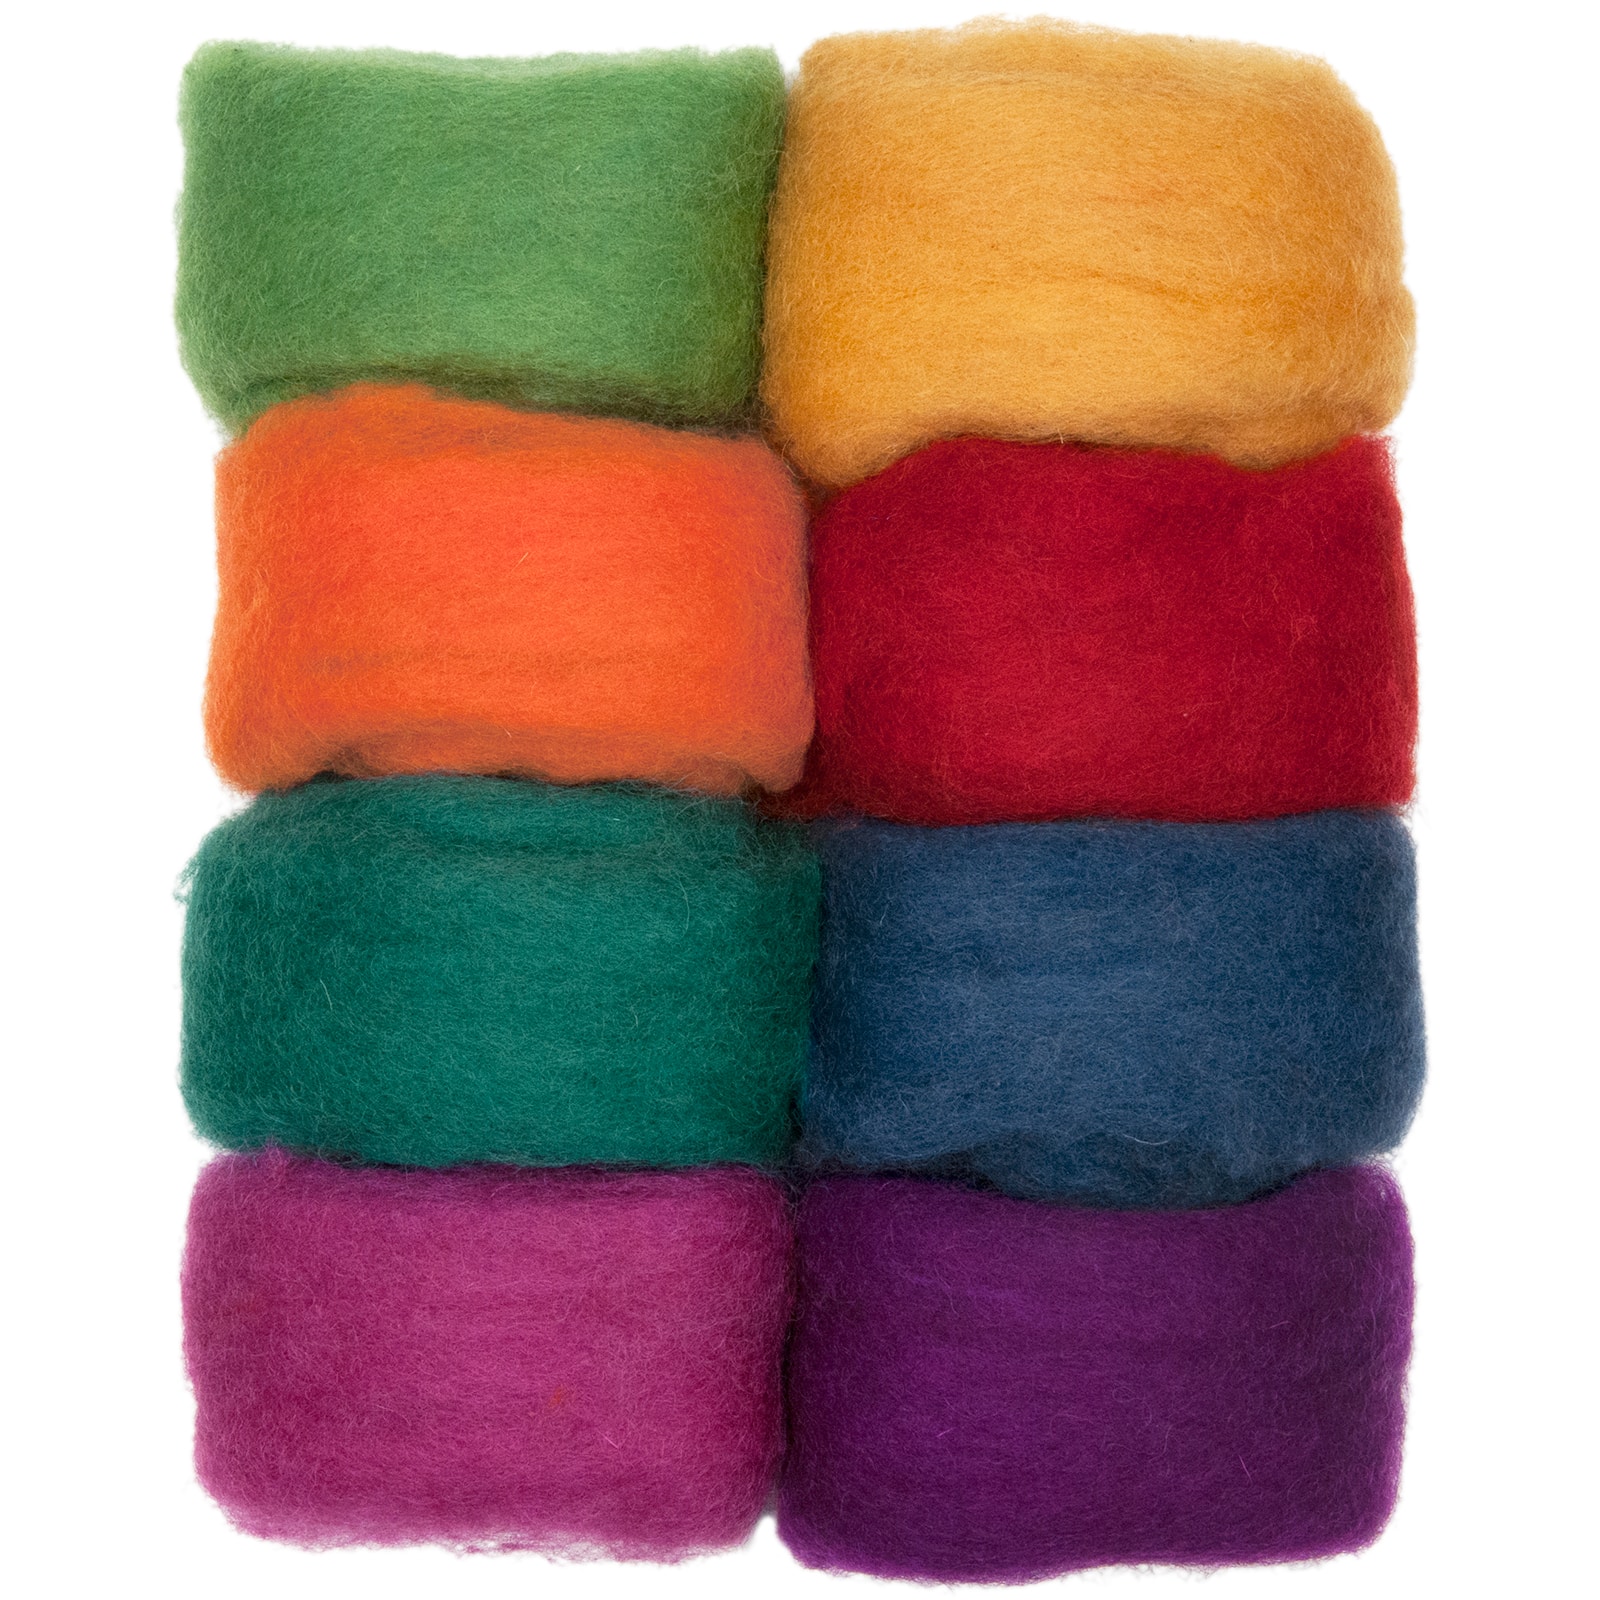 MillyRose Crafts Wool Needle Felting Pad - Gives You Space to Work Make  Your Needle Felting Easier with This Quality Needle Felting Mat - Large  Size 10x 8X 1 Inches